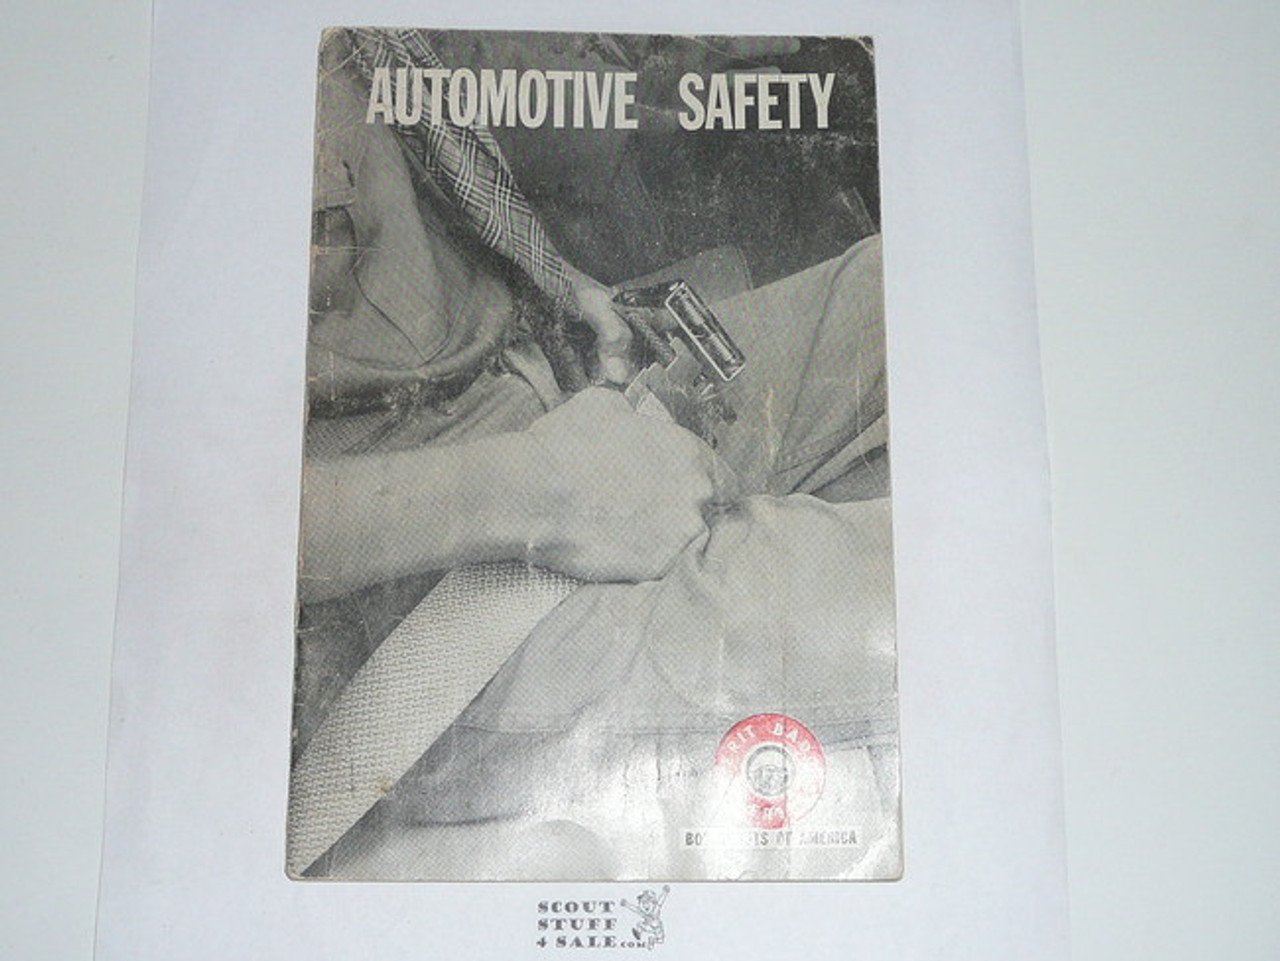 Automotive Safety Merit Badge Pamphlet, Type 7, Full Picture, 5-69 Printing